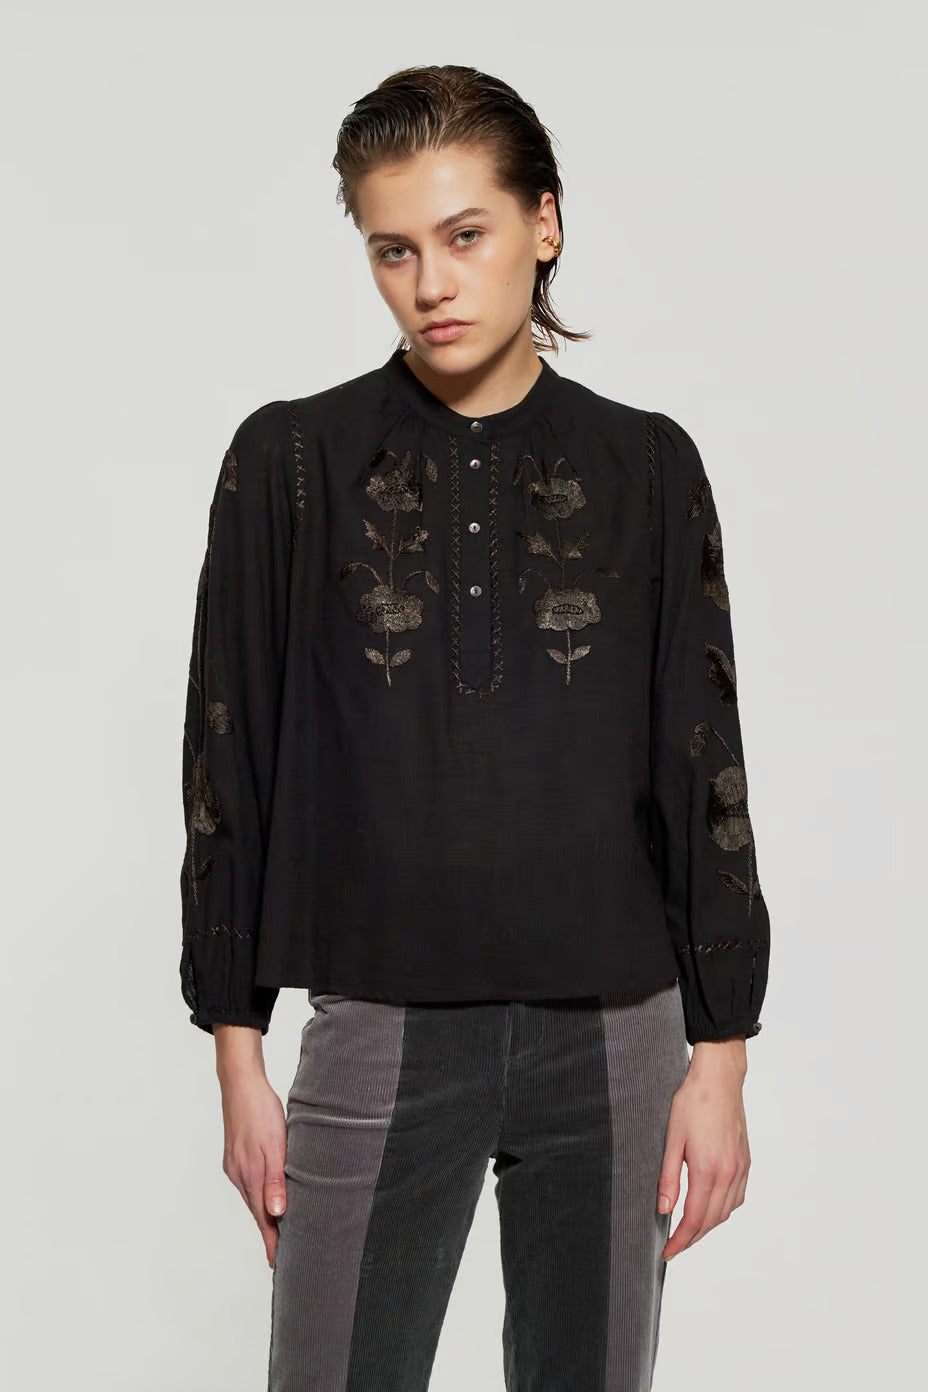 ANTIK BATIK _ Savoir Faire Ethical Artisan Made Fashion _ Boho Style Popover Cotton Blouse w/ Handstitched Brown Floral Embroidery on Black Hand loomed Cotton